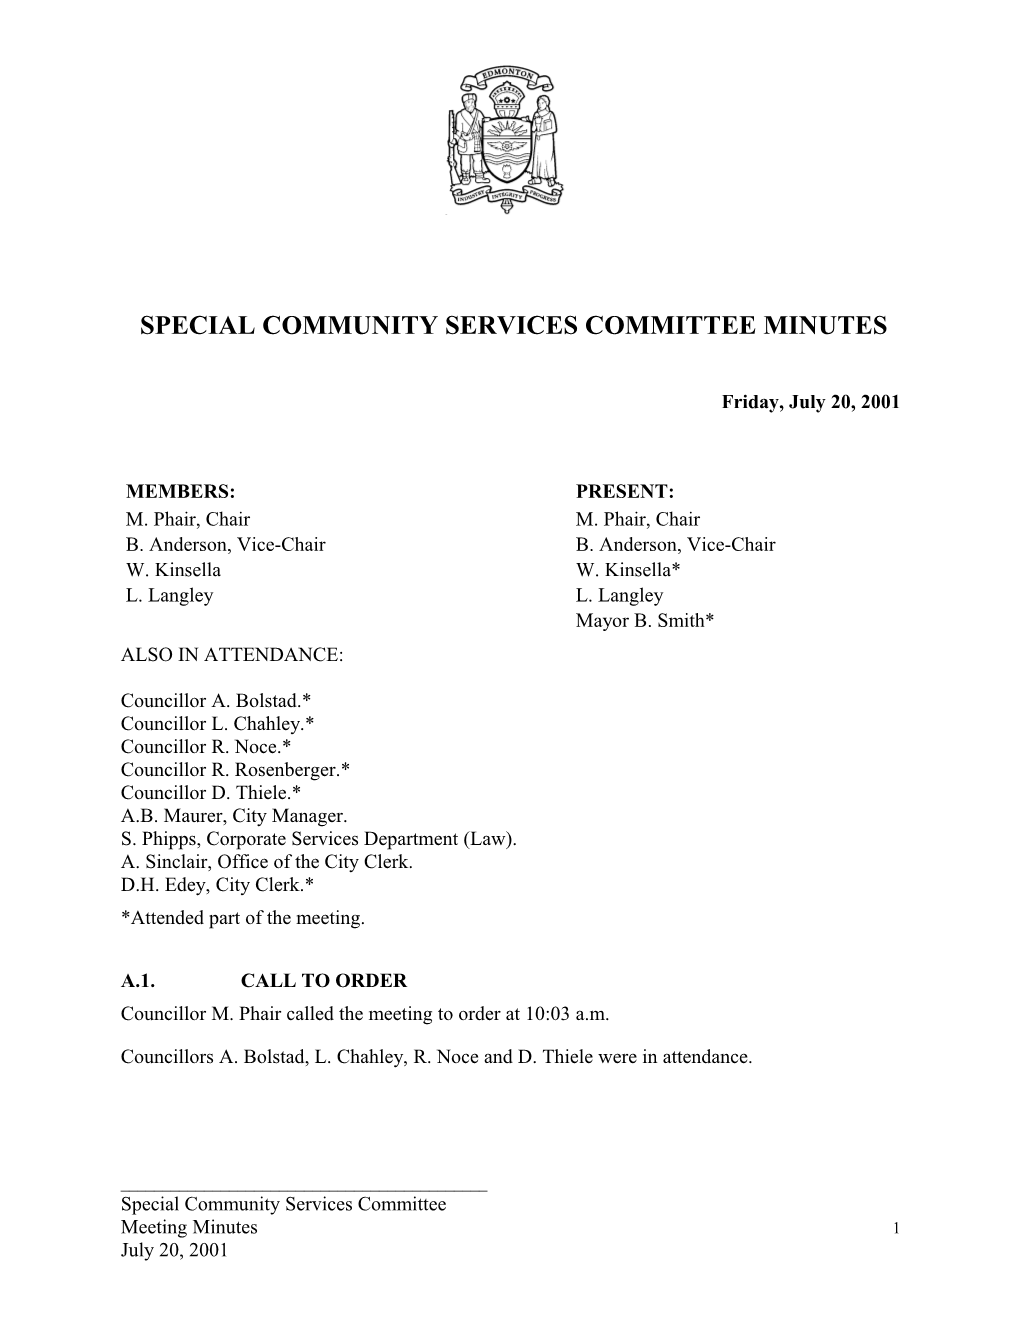 Minutes for Community Services Committee July 20, 2001 Meeting